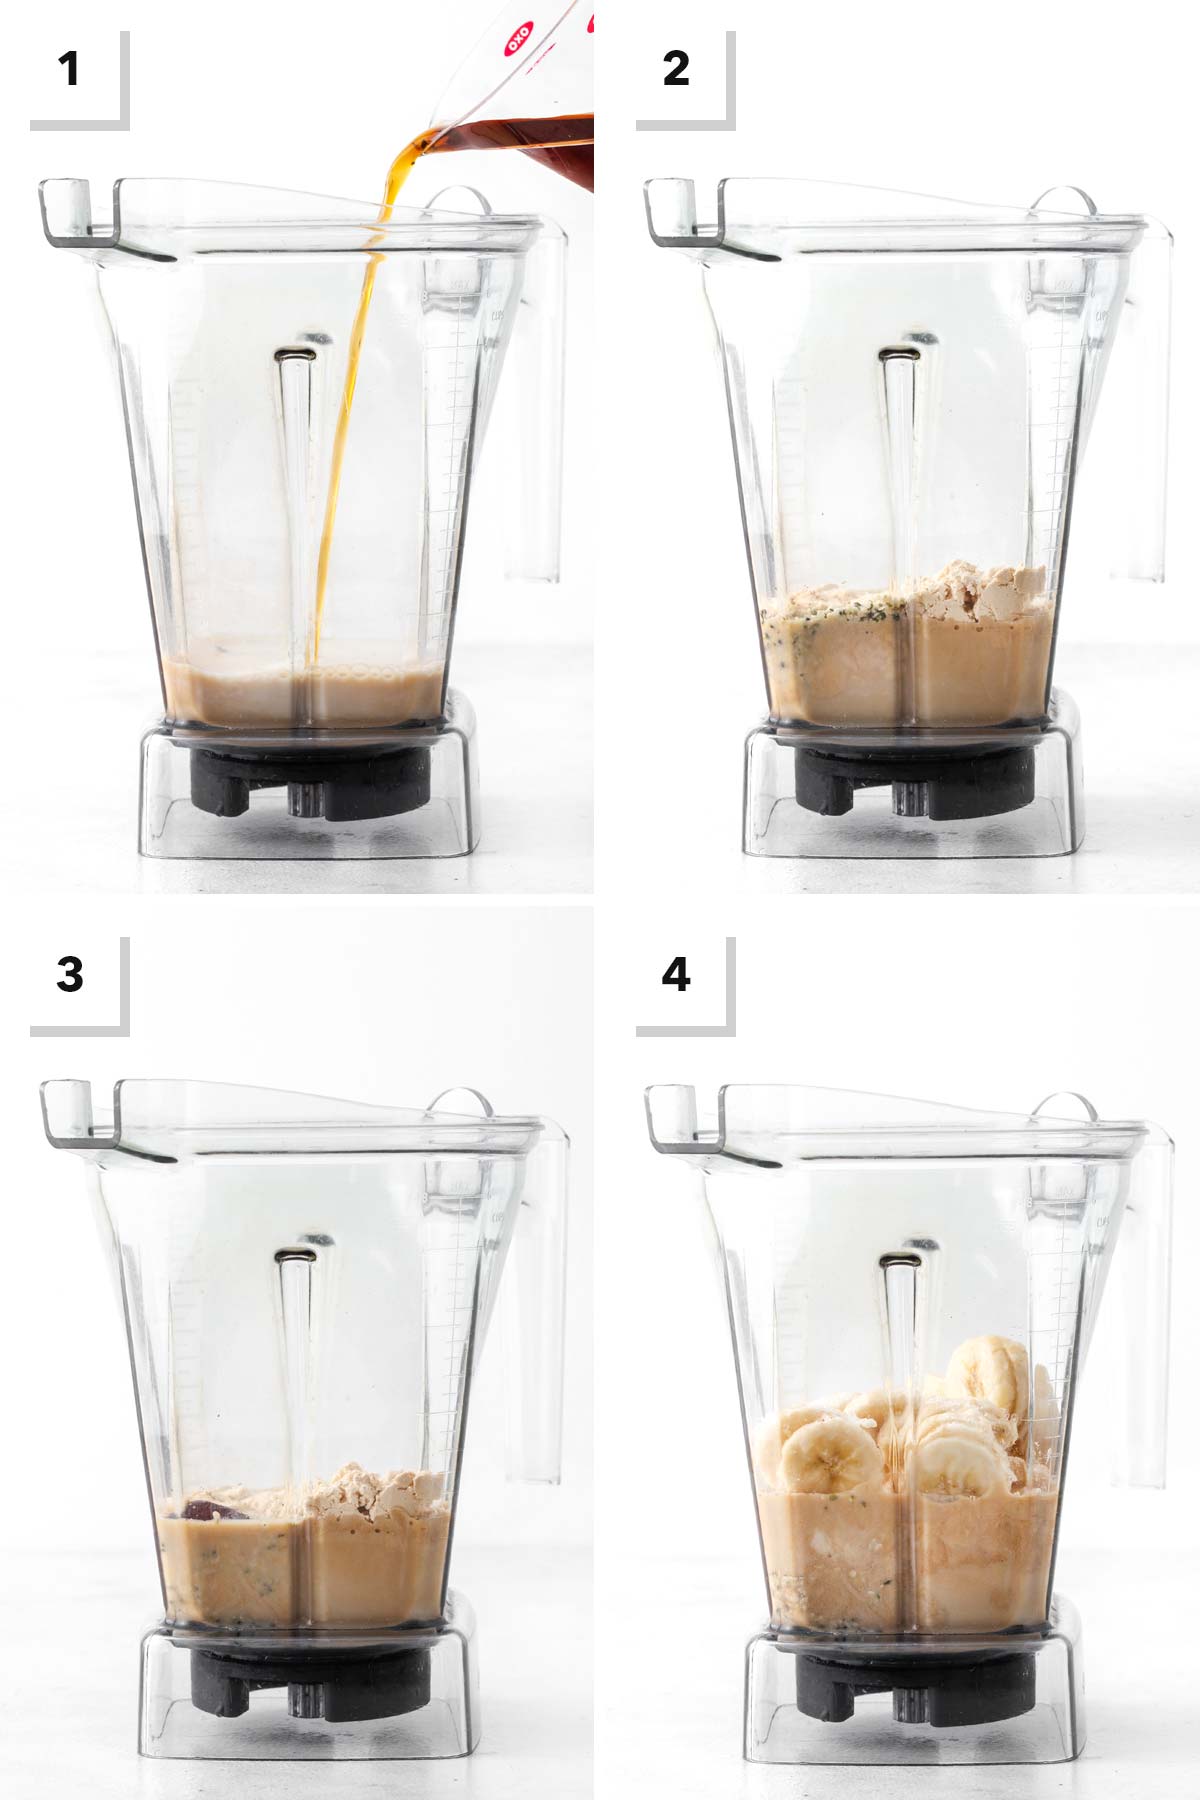 Steps for making a coffee protein smoothie.